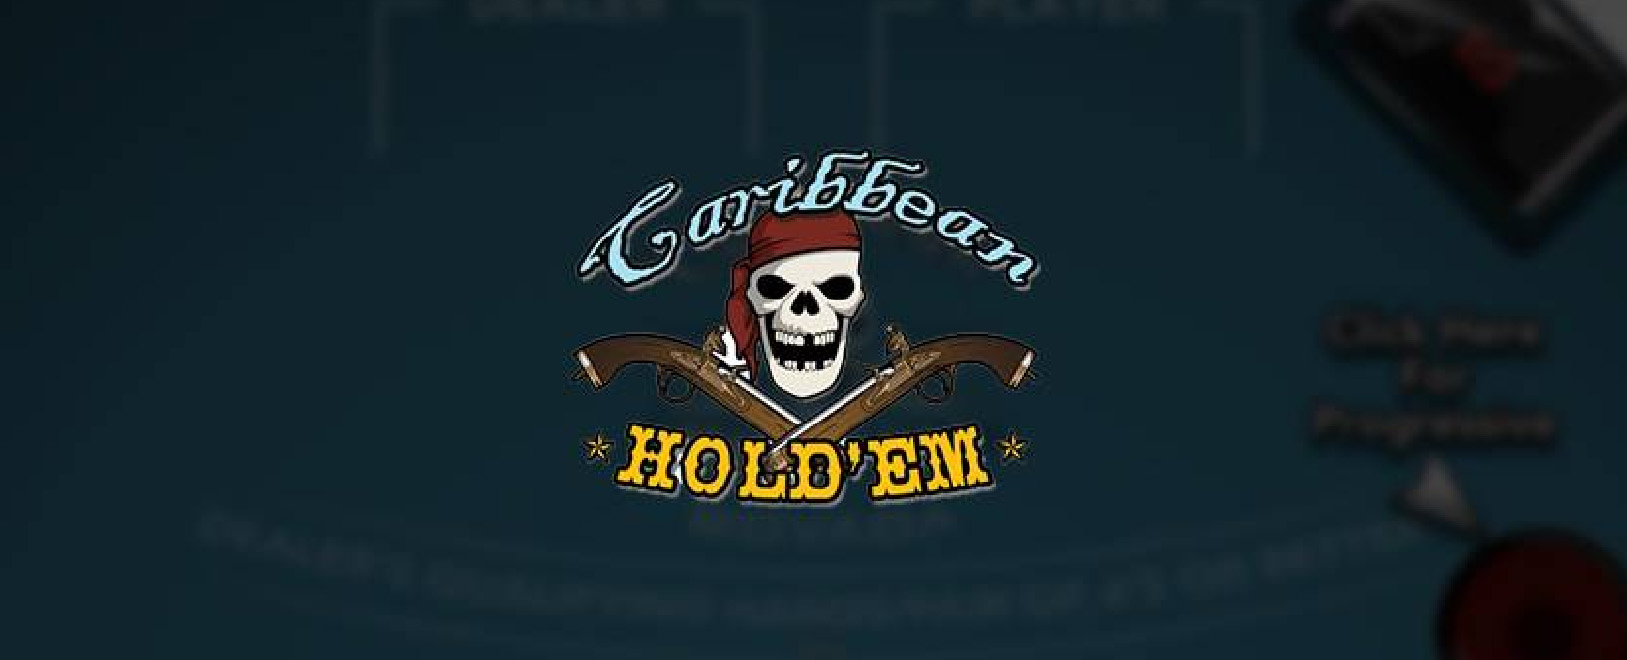 Play Caribbean Hold'em casino game at Cafe Casino